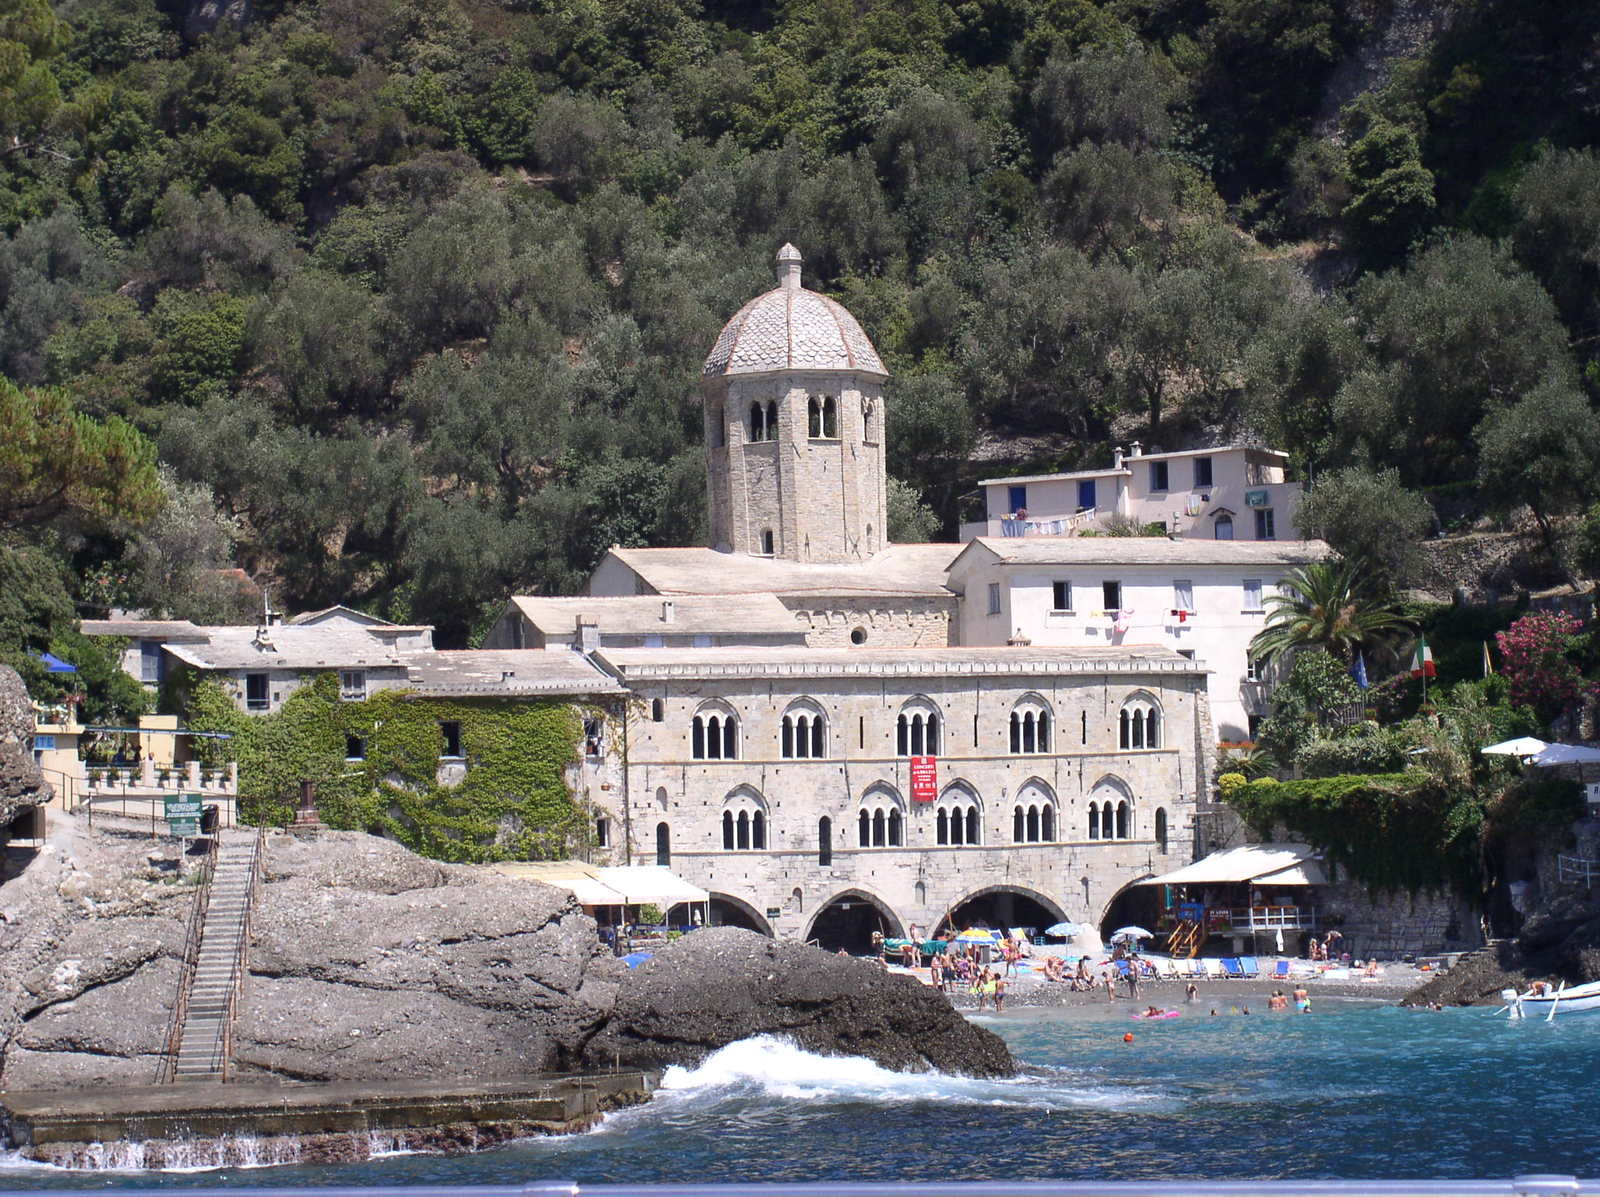 a beach scene is shown in the foreground of this building